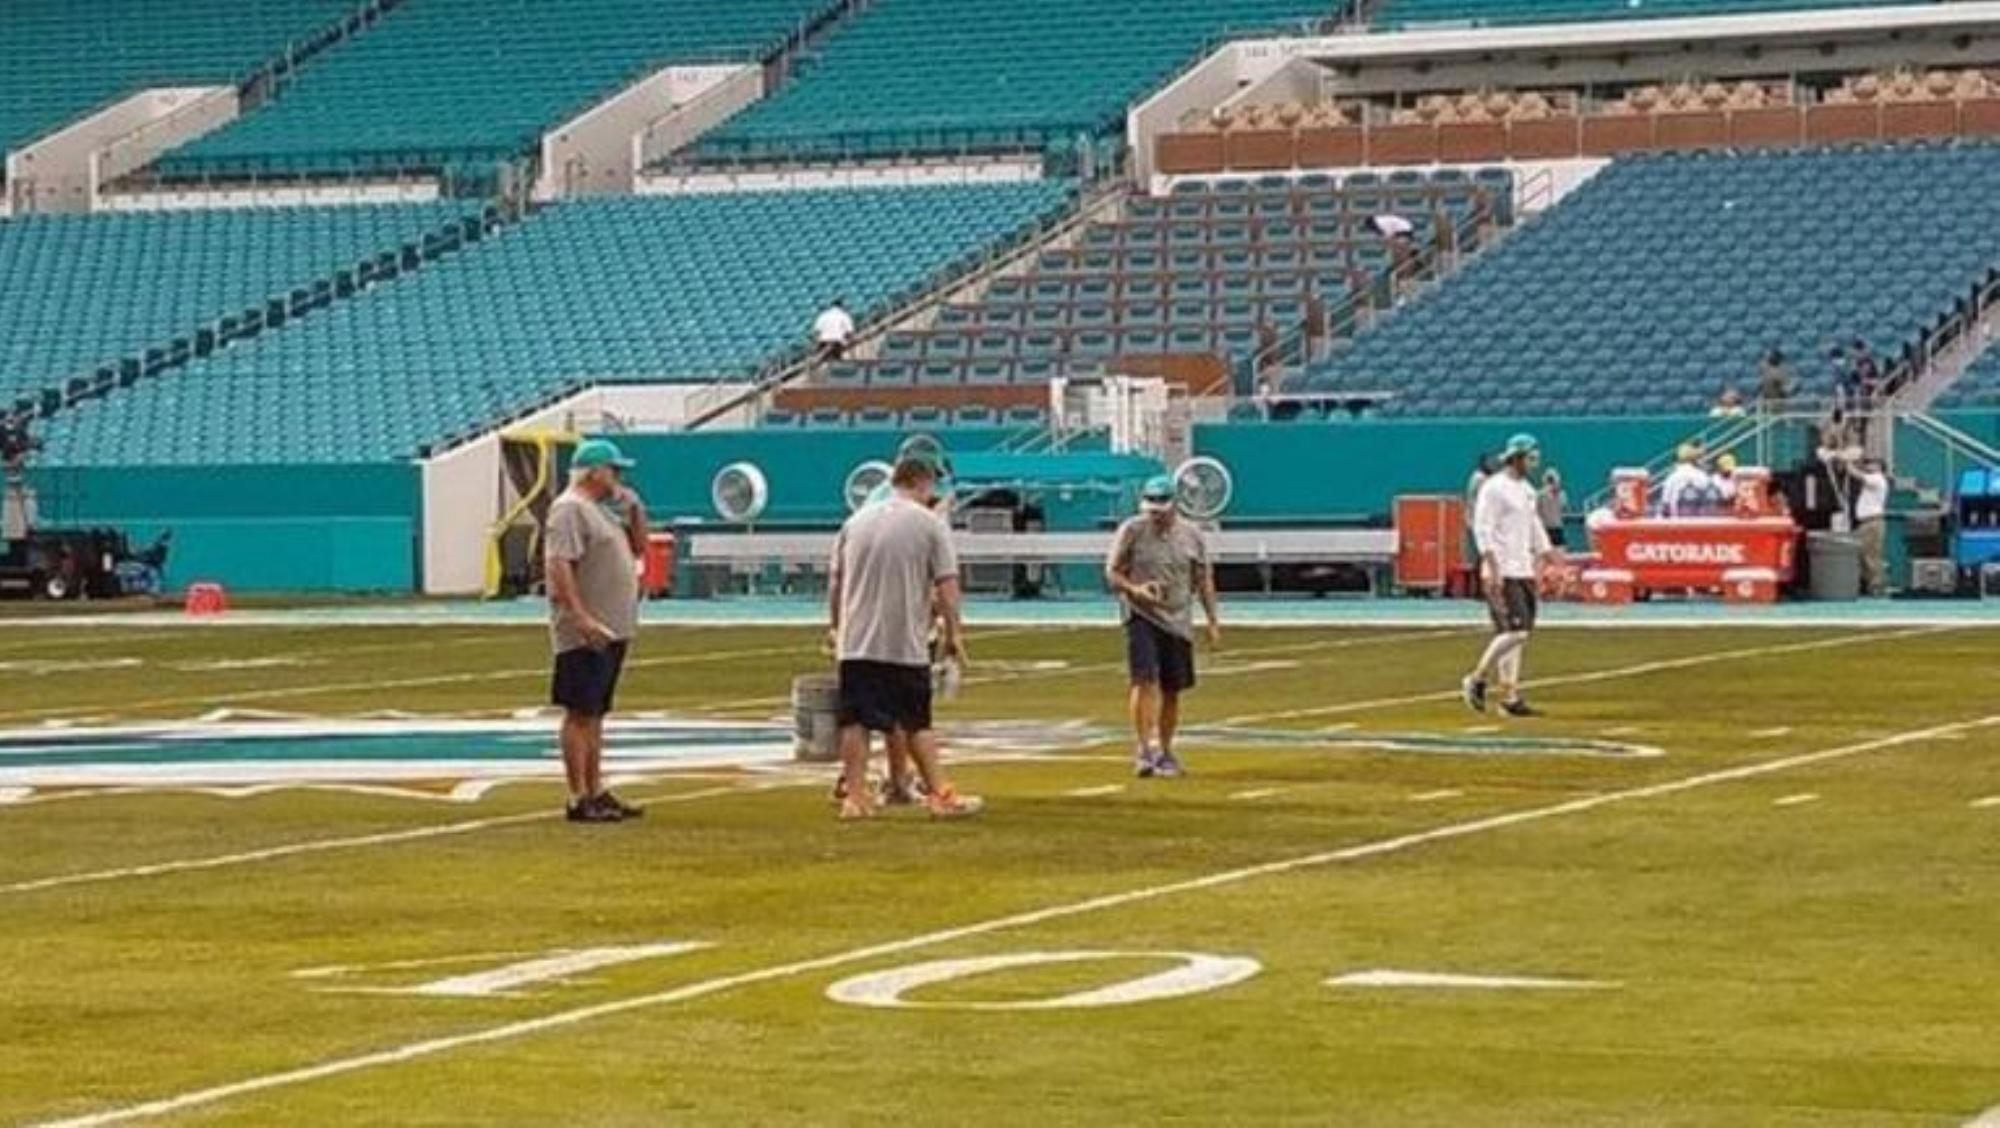 Hard Rock Stadium grounds crew working on the Dolphins home field (Credit: NBC Sports)